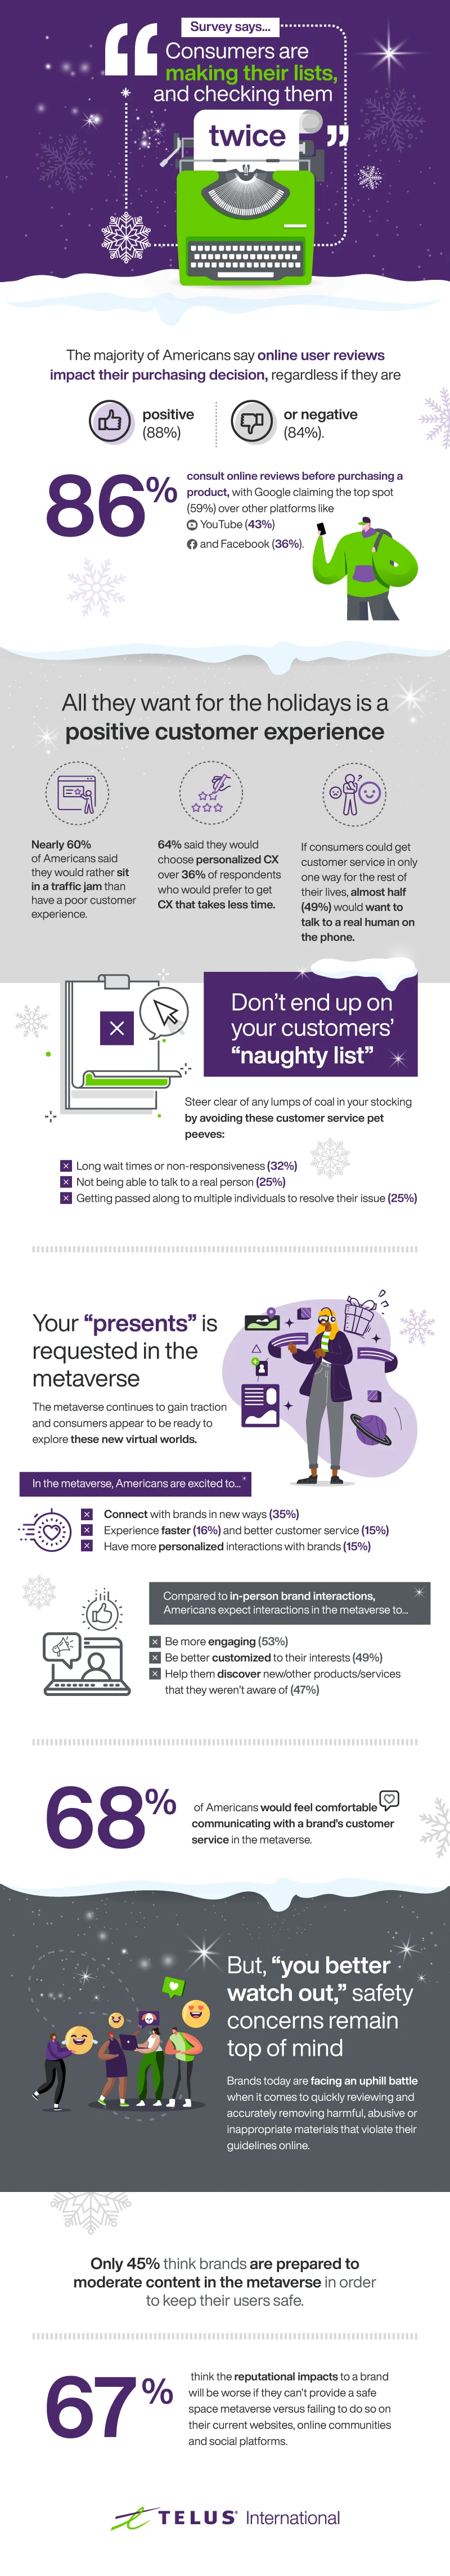 End-of-year 2022 infographic featuring customer experience survey results